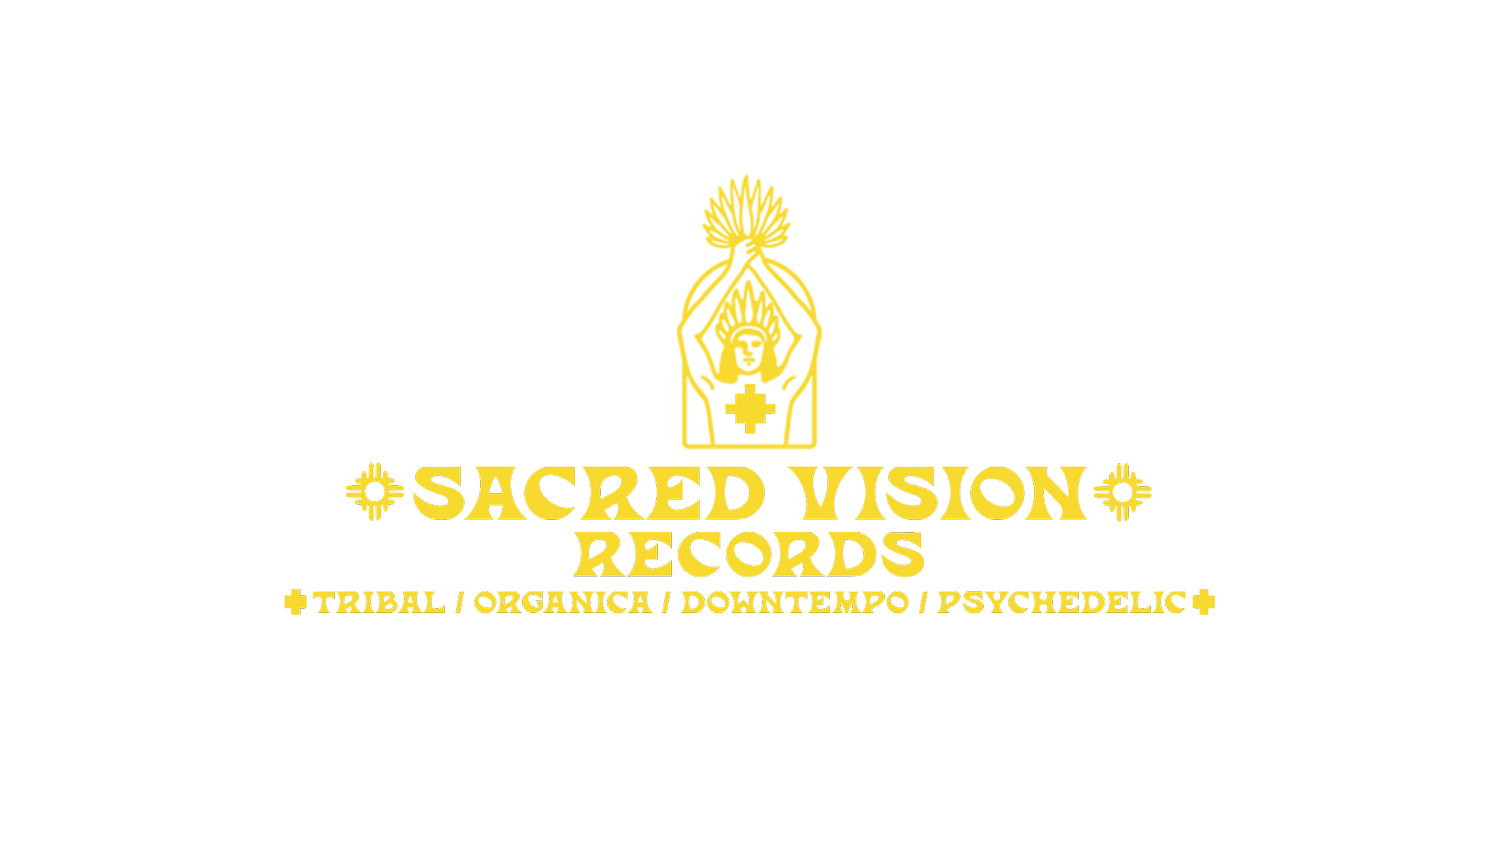 Sacred Vision Records - Conscious Music Events / Ecstatic Music / Tribal Sounds / World music